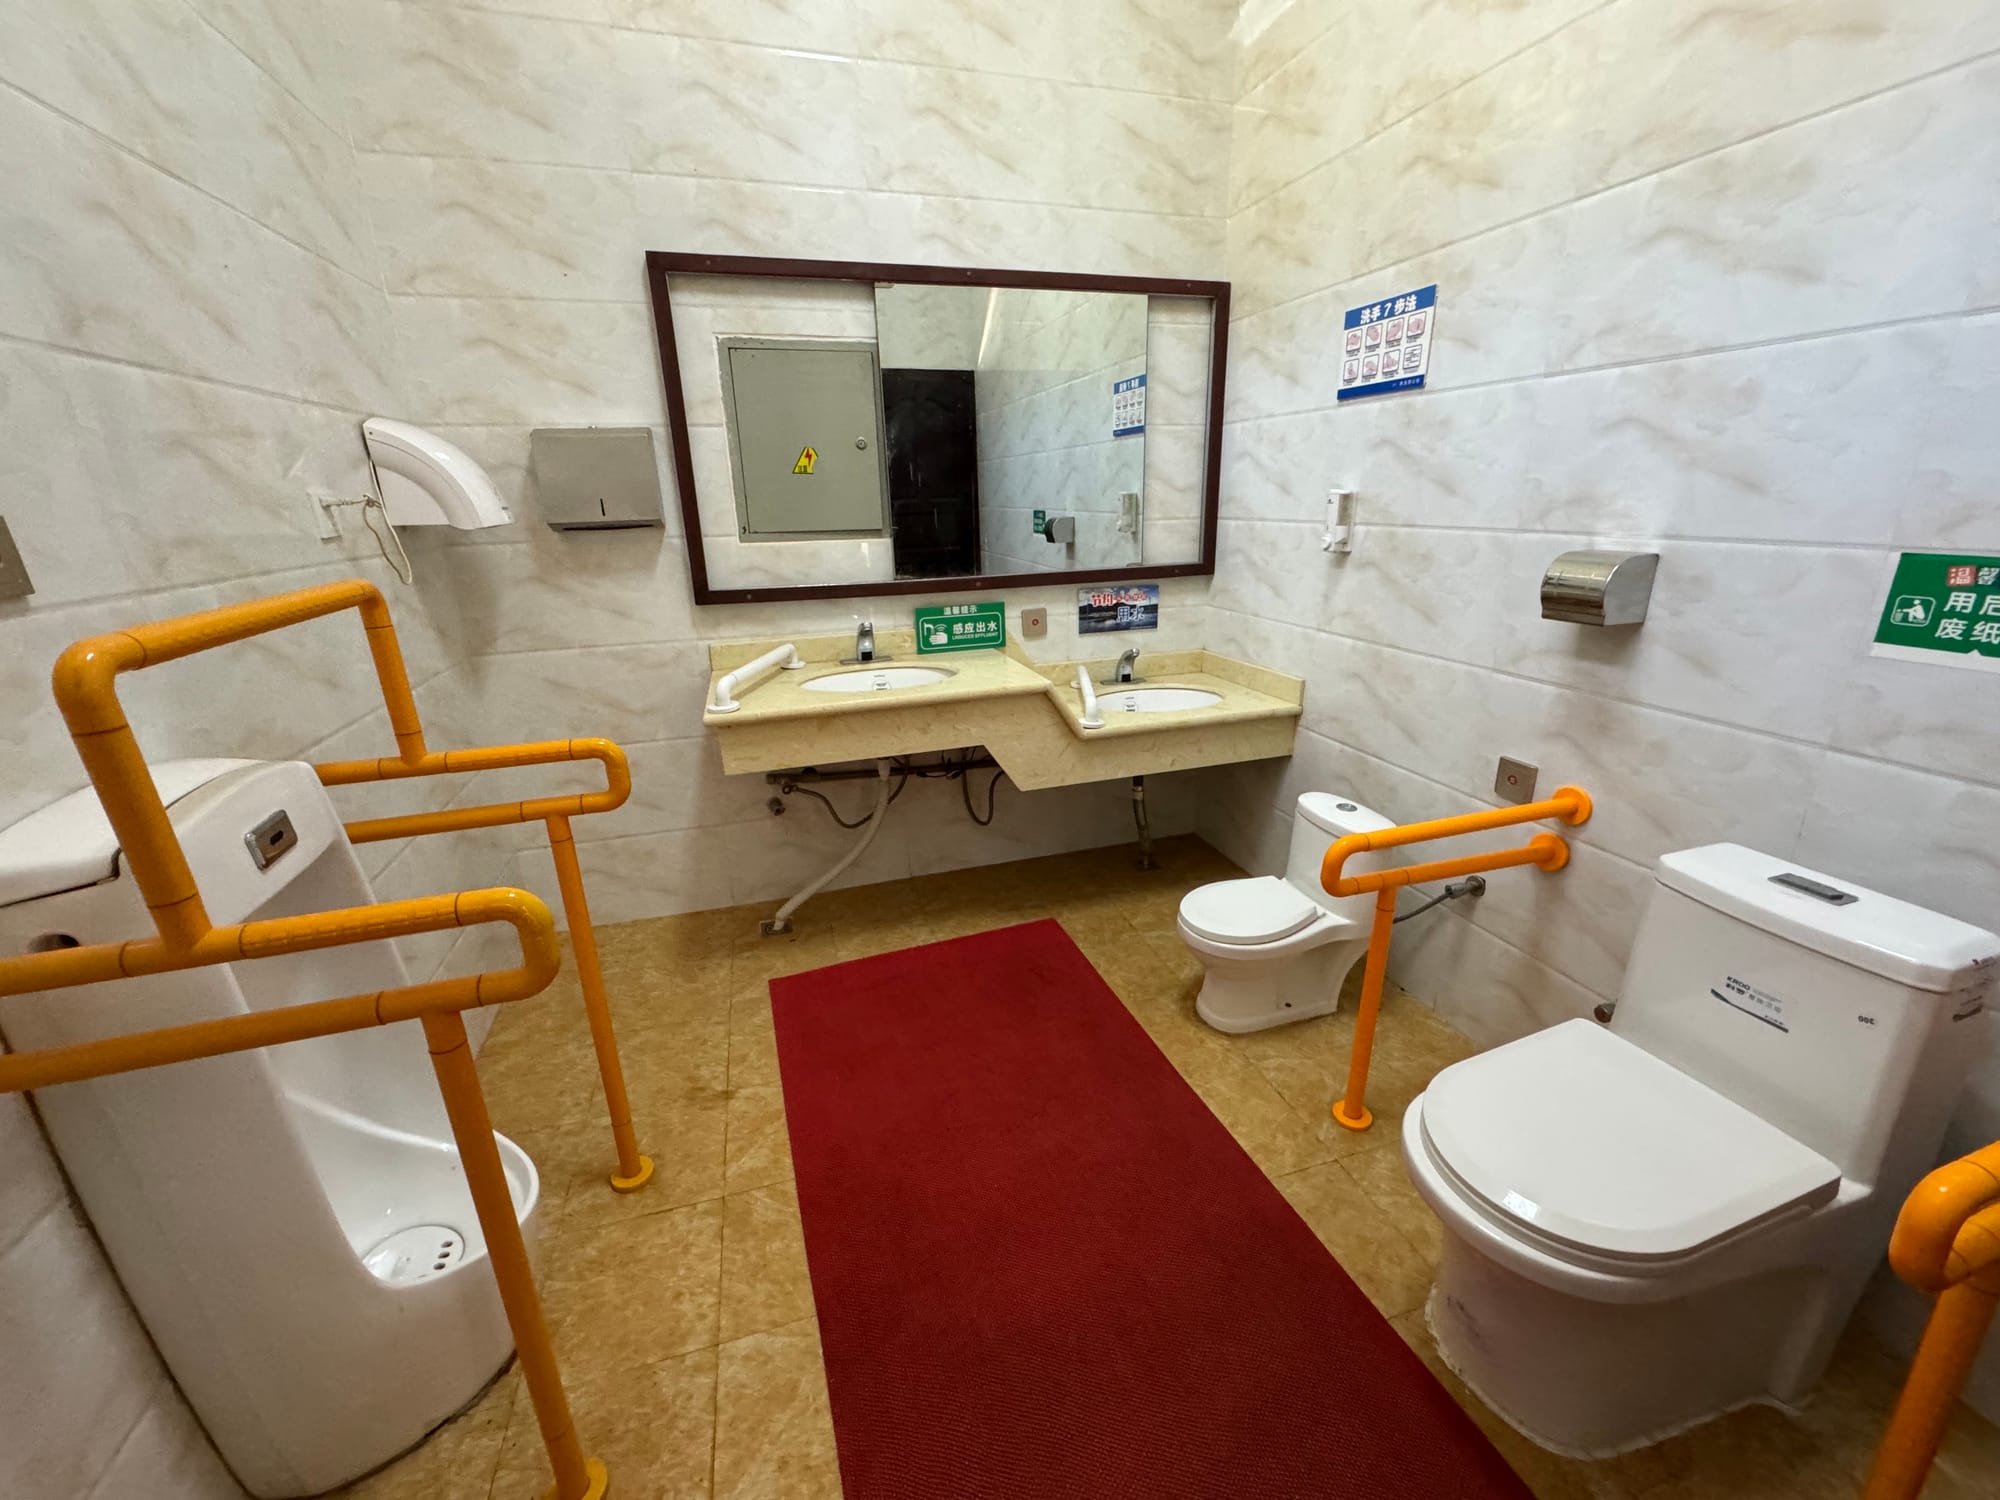 What to expect from Chinese public toilets?